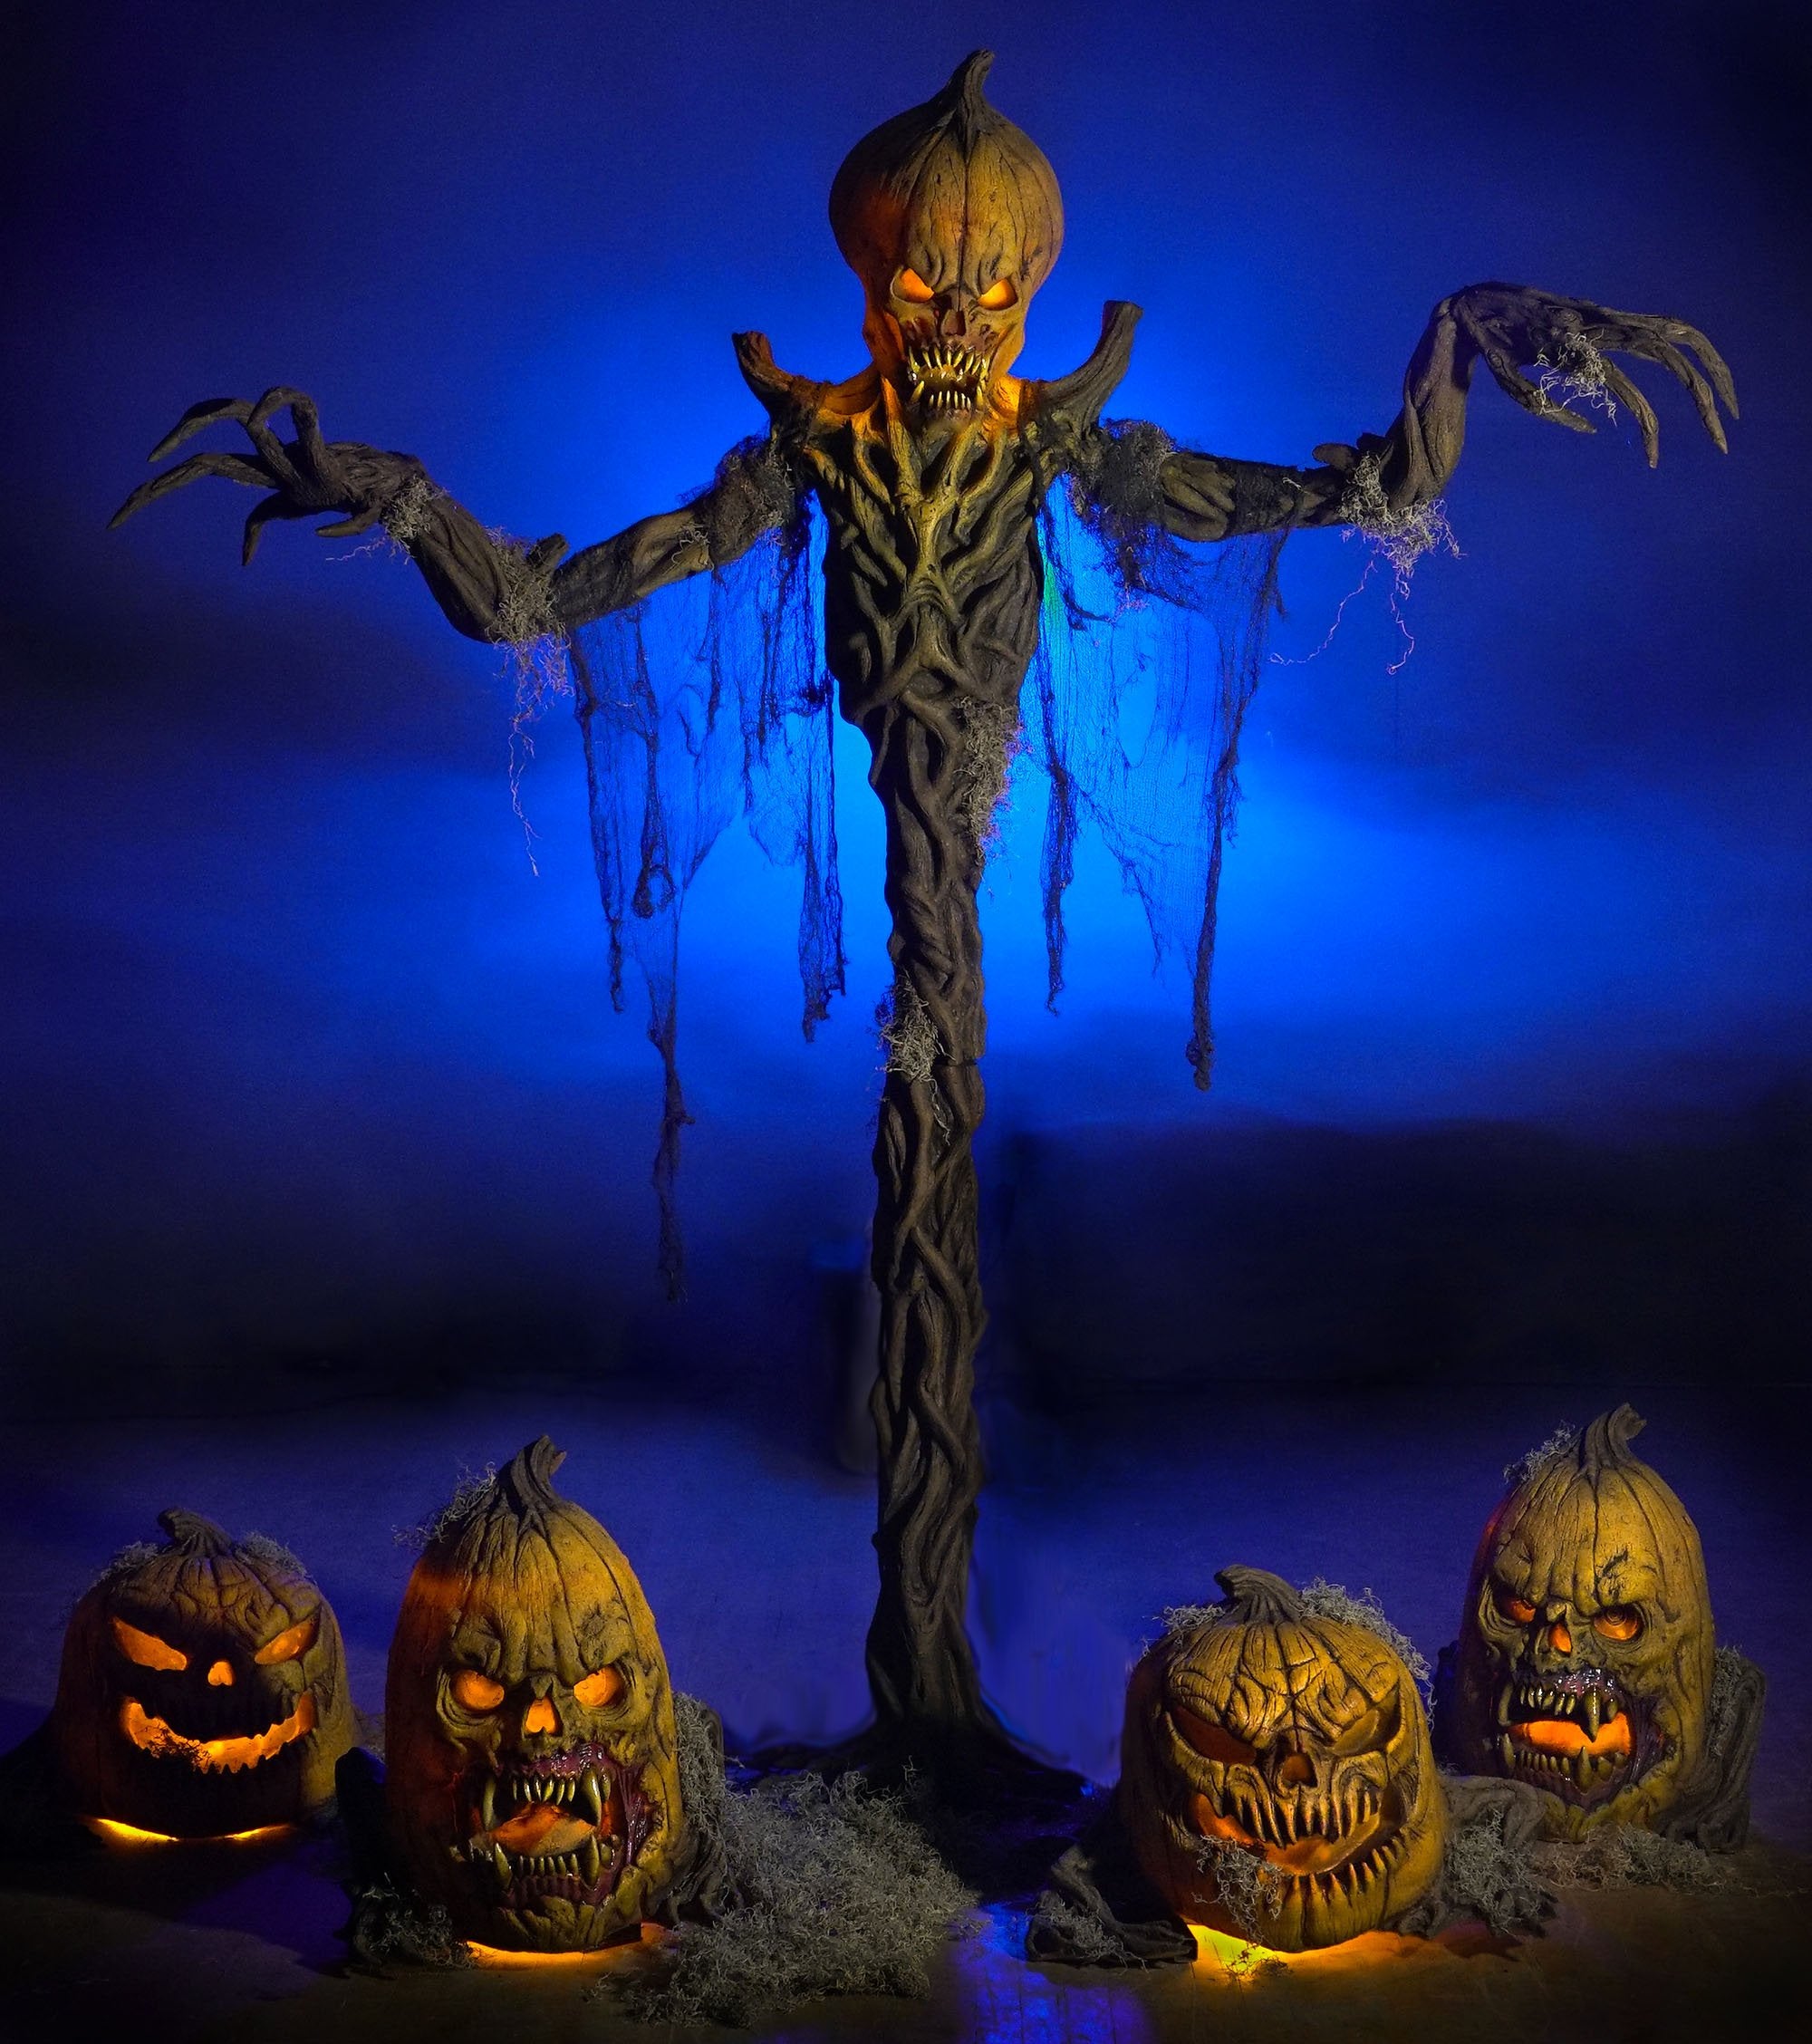 Halloween Props for Sale Online for Decorating Home and Haunt ...